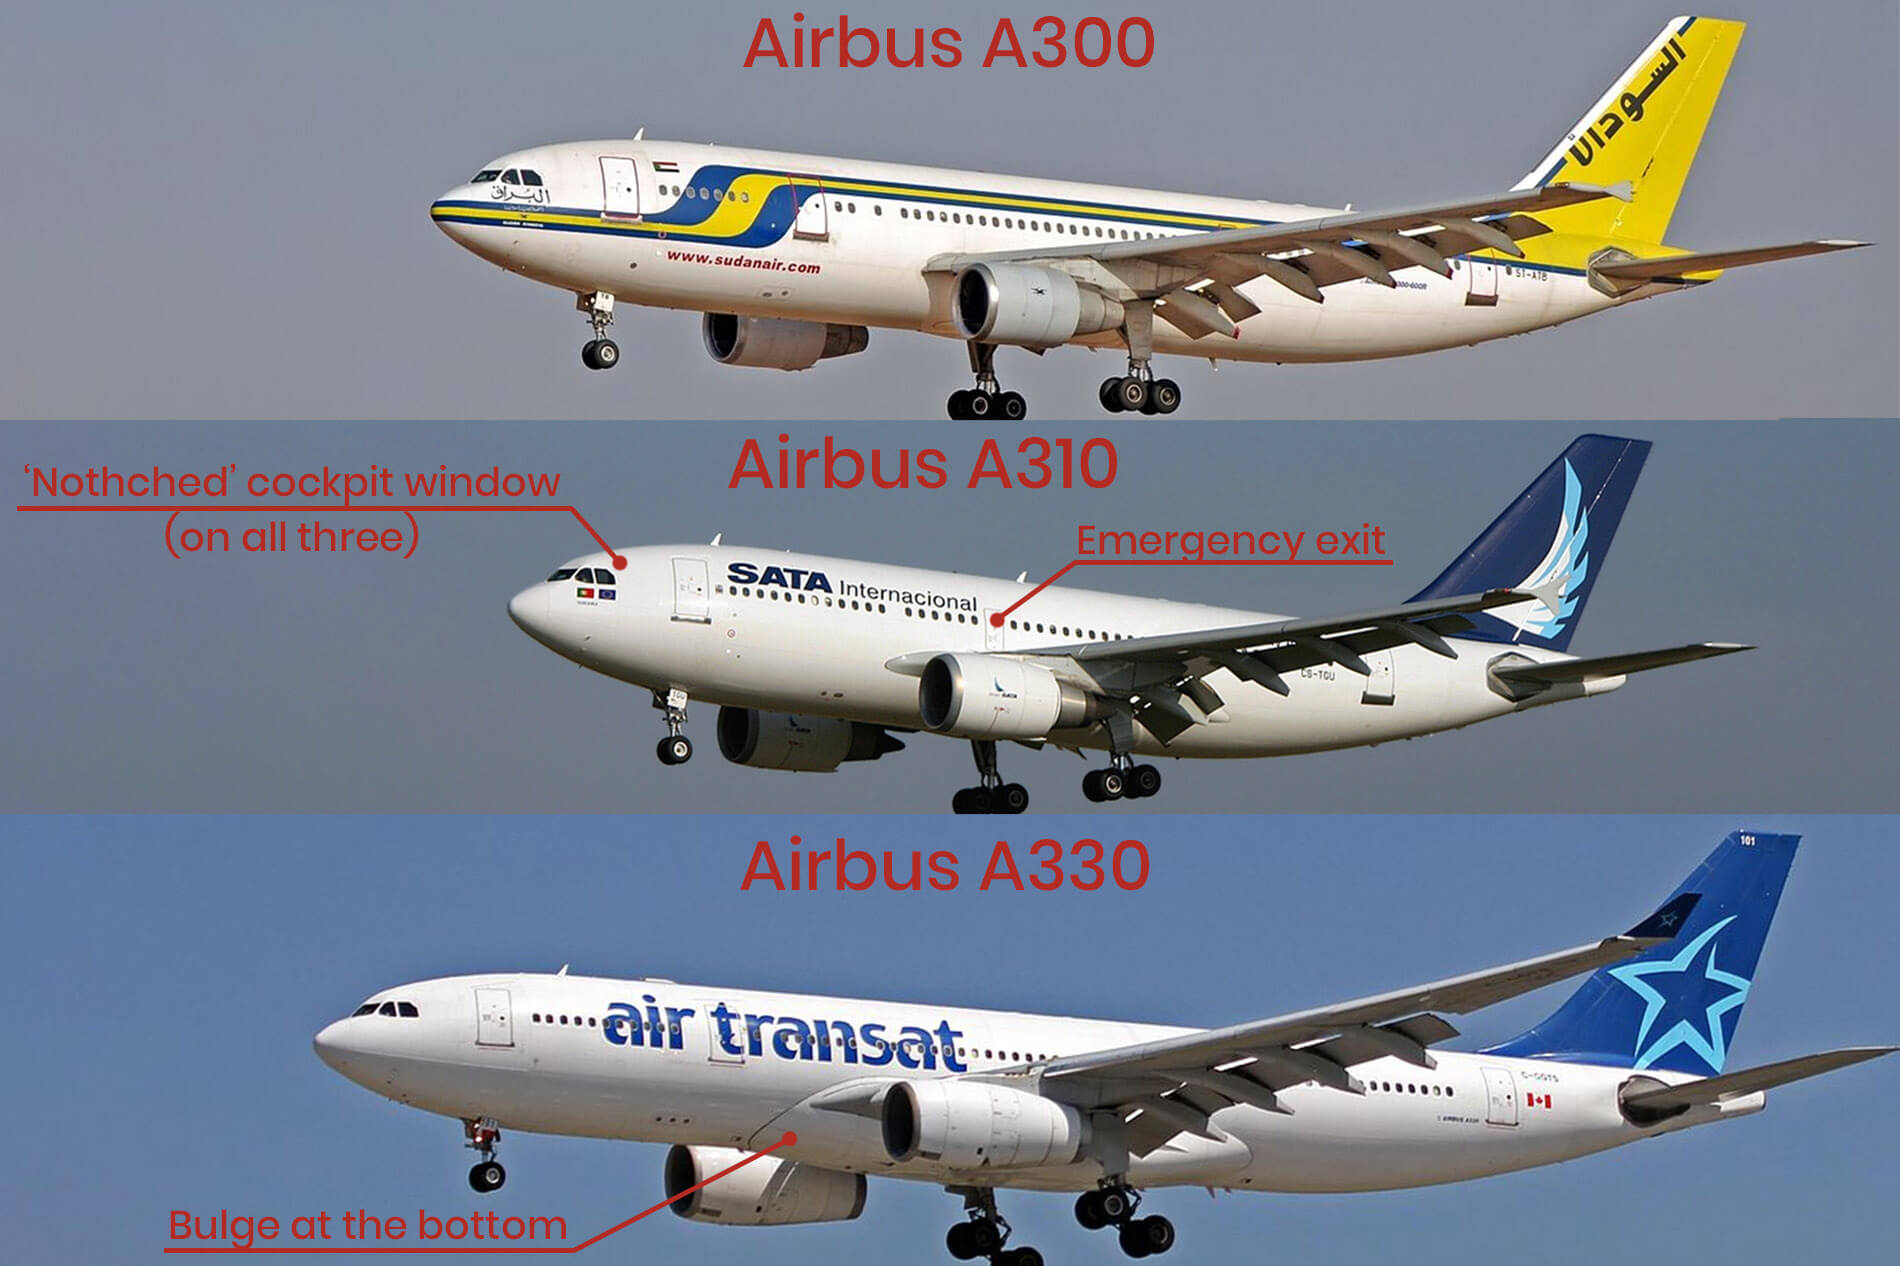 Airbus A300 A310 A330 spotting guide